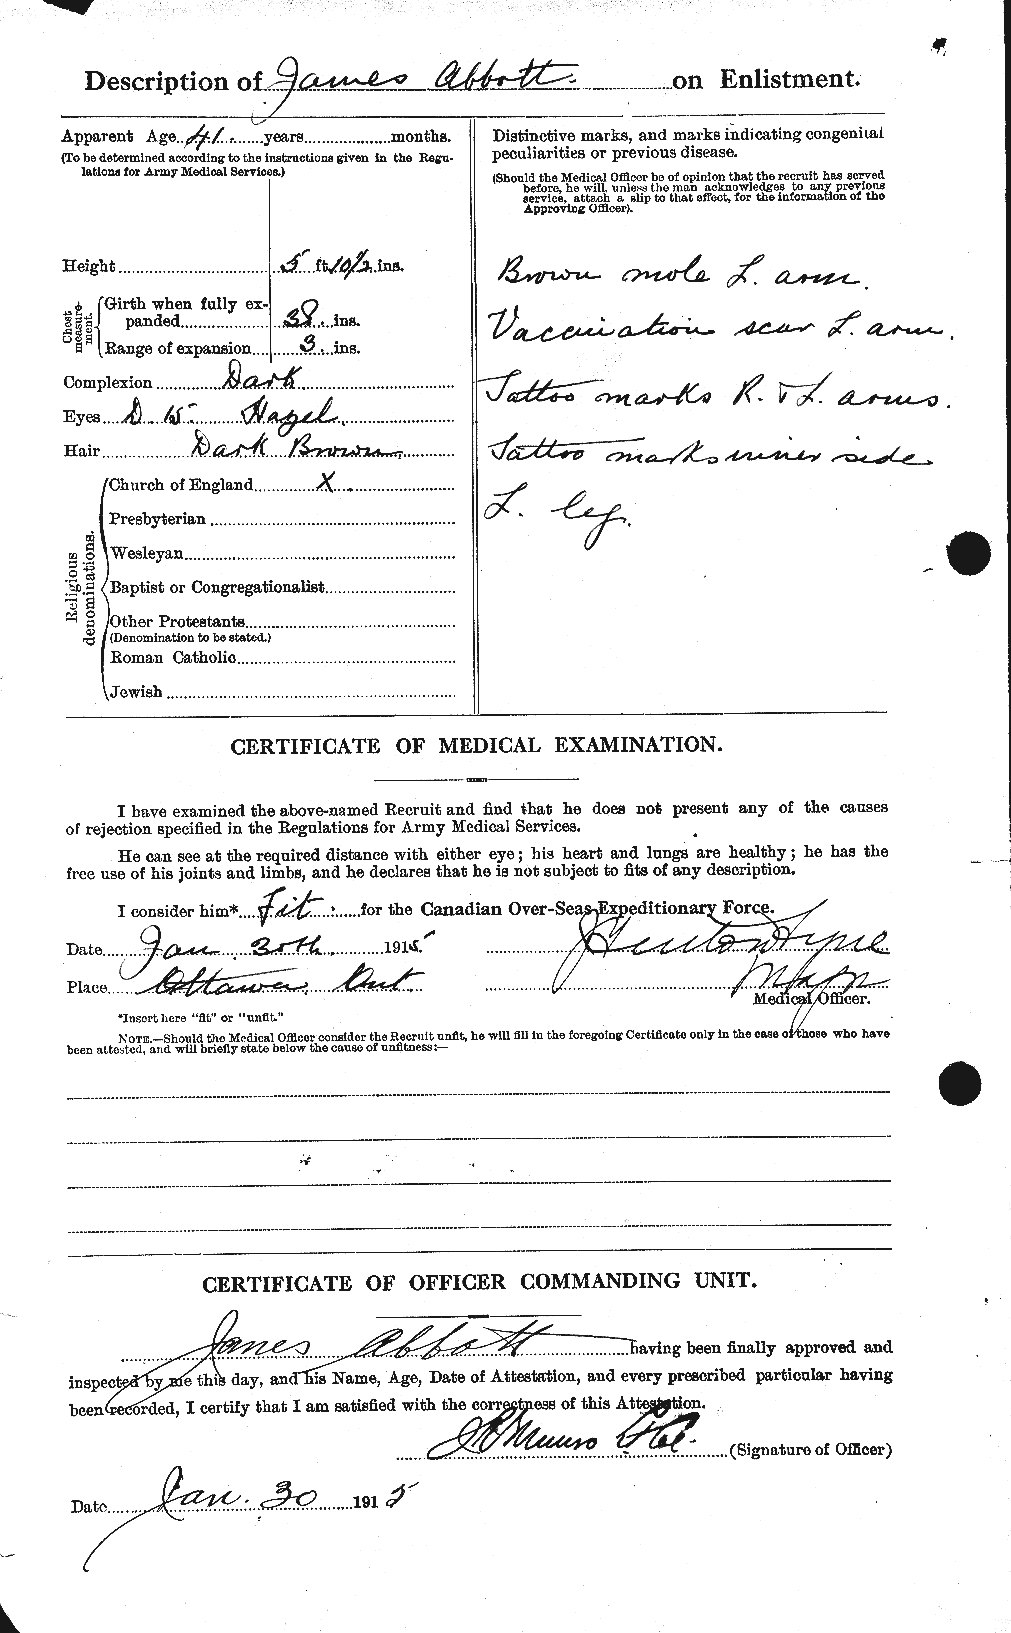 Personnel Records of the First World War - CEF 200975b